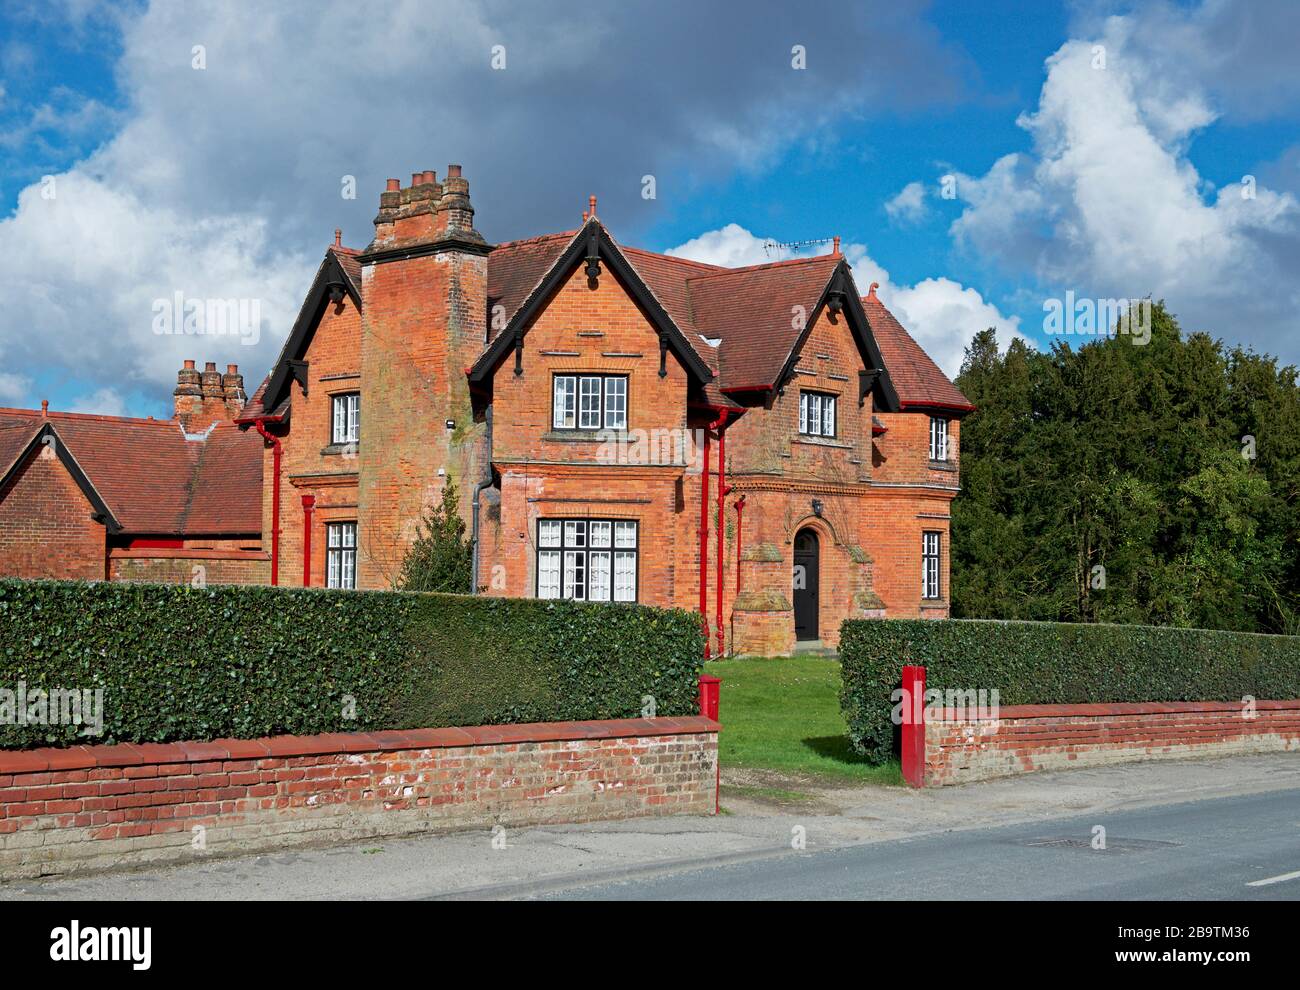 Brick estate house in the village of Sledmere, East Yorkshire, England UK Stock Photo